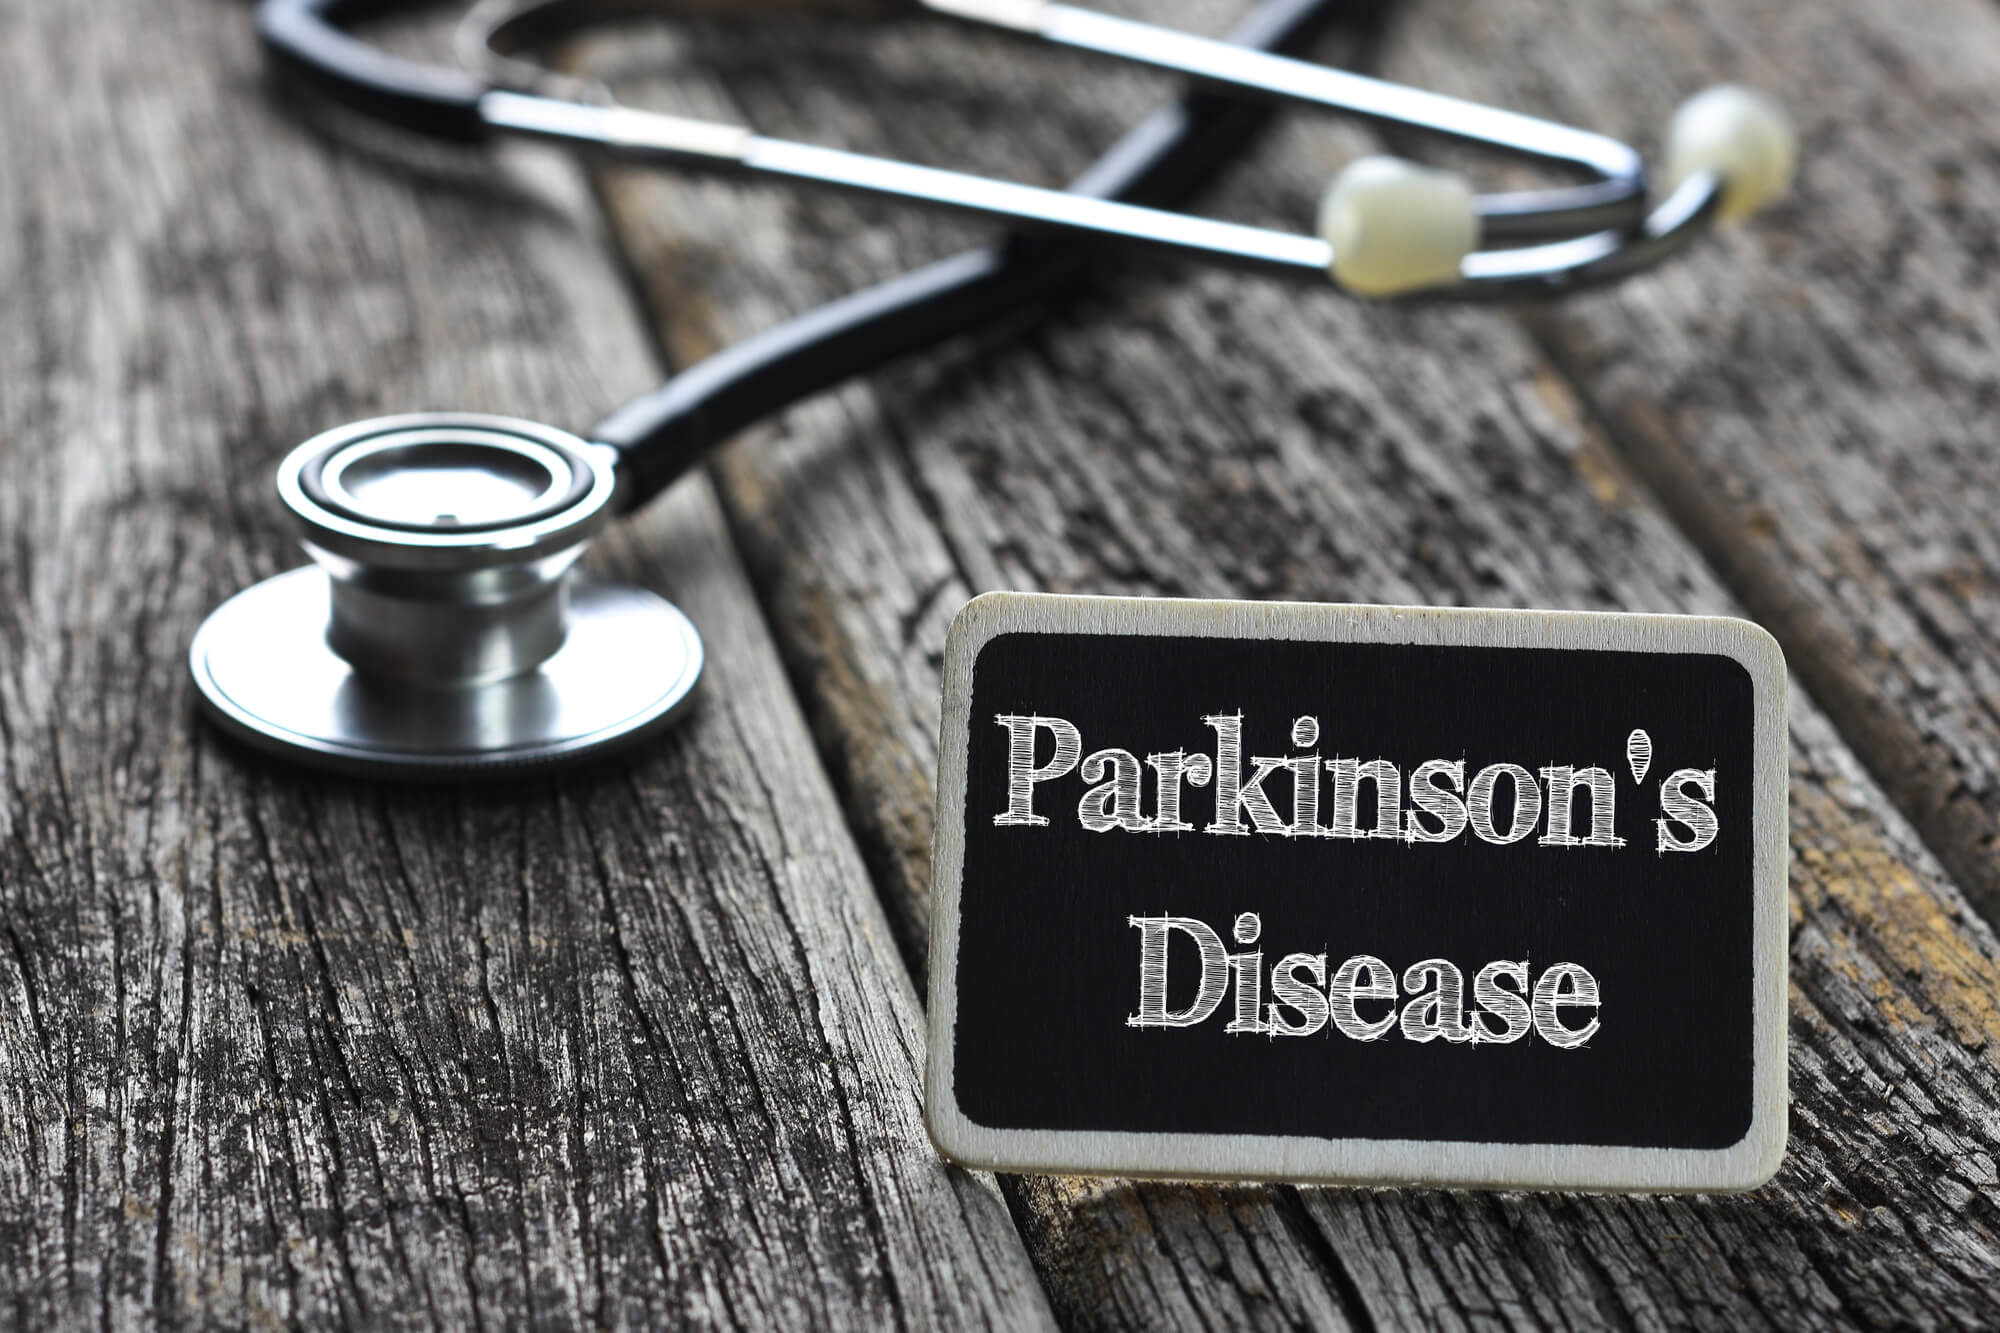 Parkinson's disease and how it affects your loved one